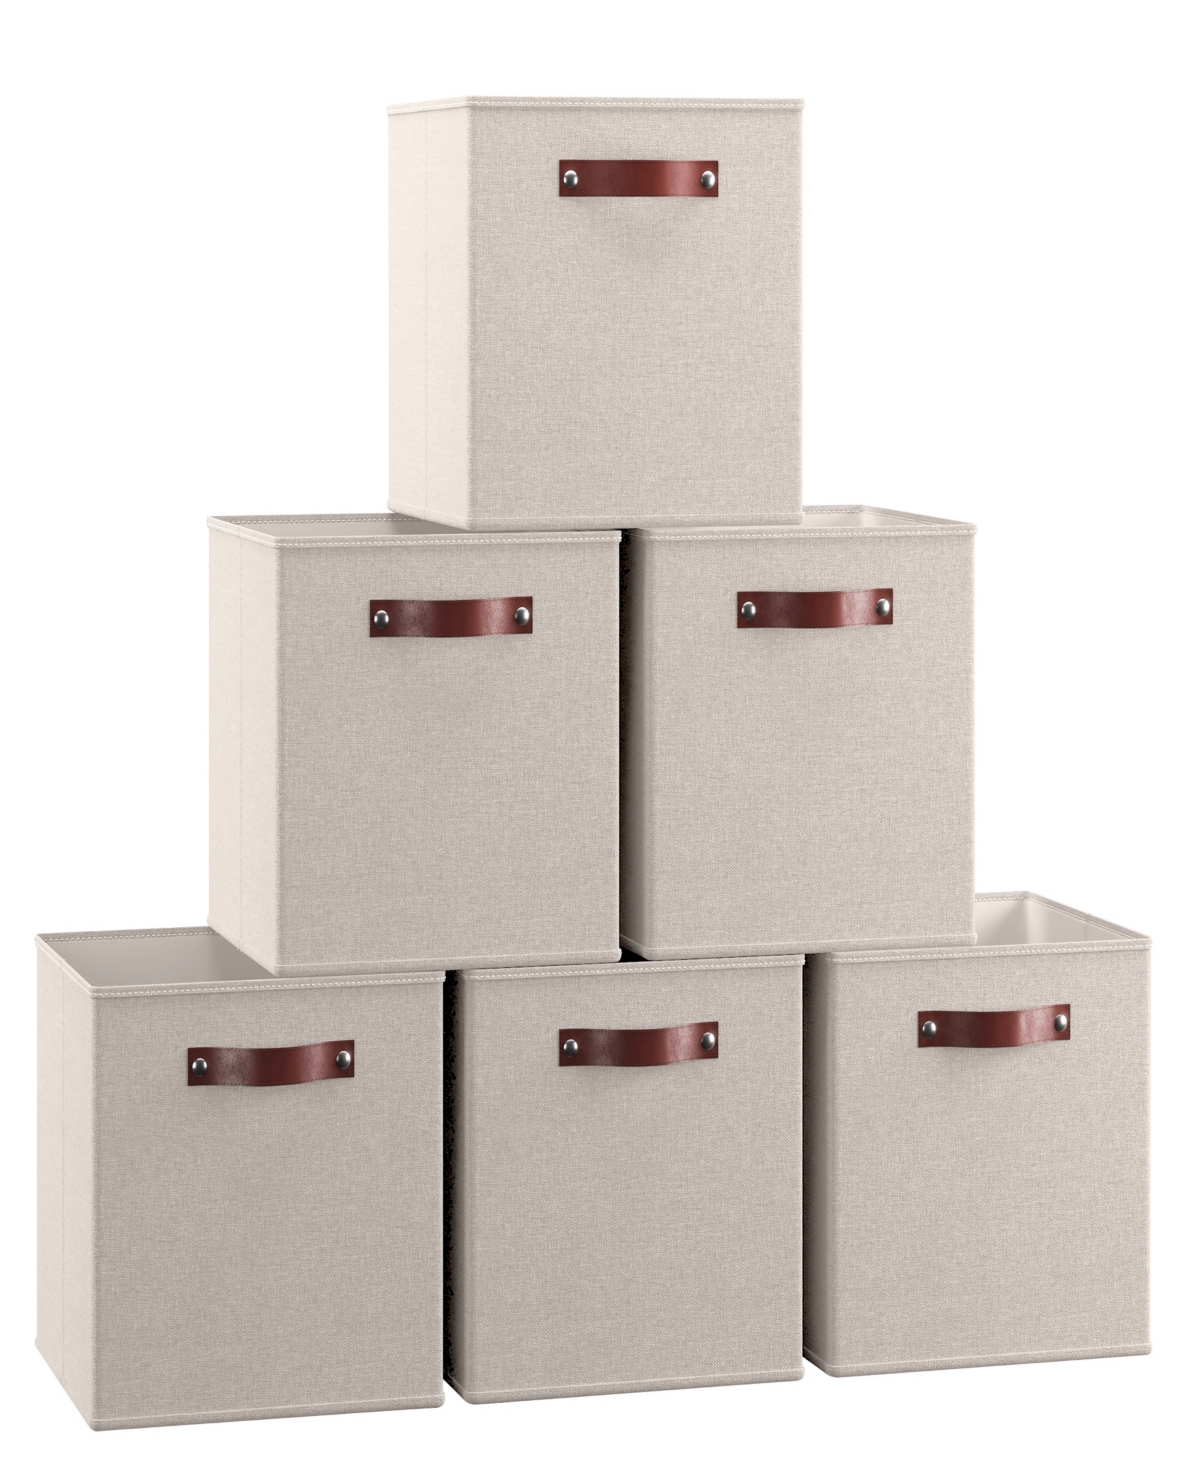 Foldable Linen Storage Cube Bin with Leather Handles - Set of 6 - Beige